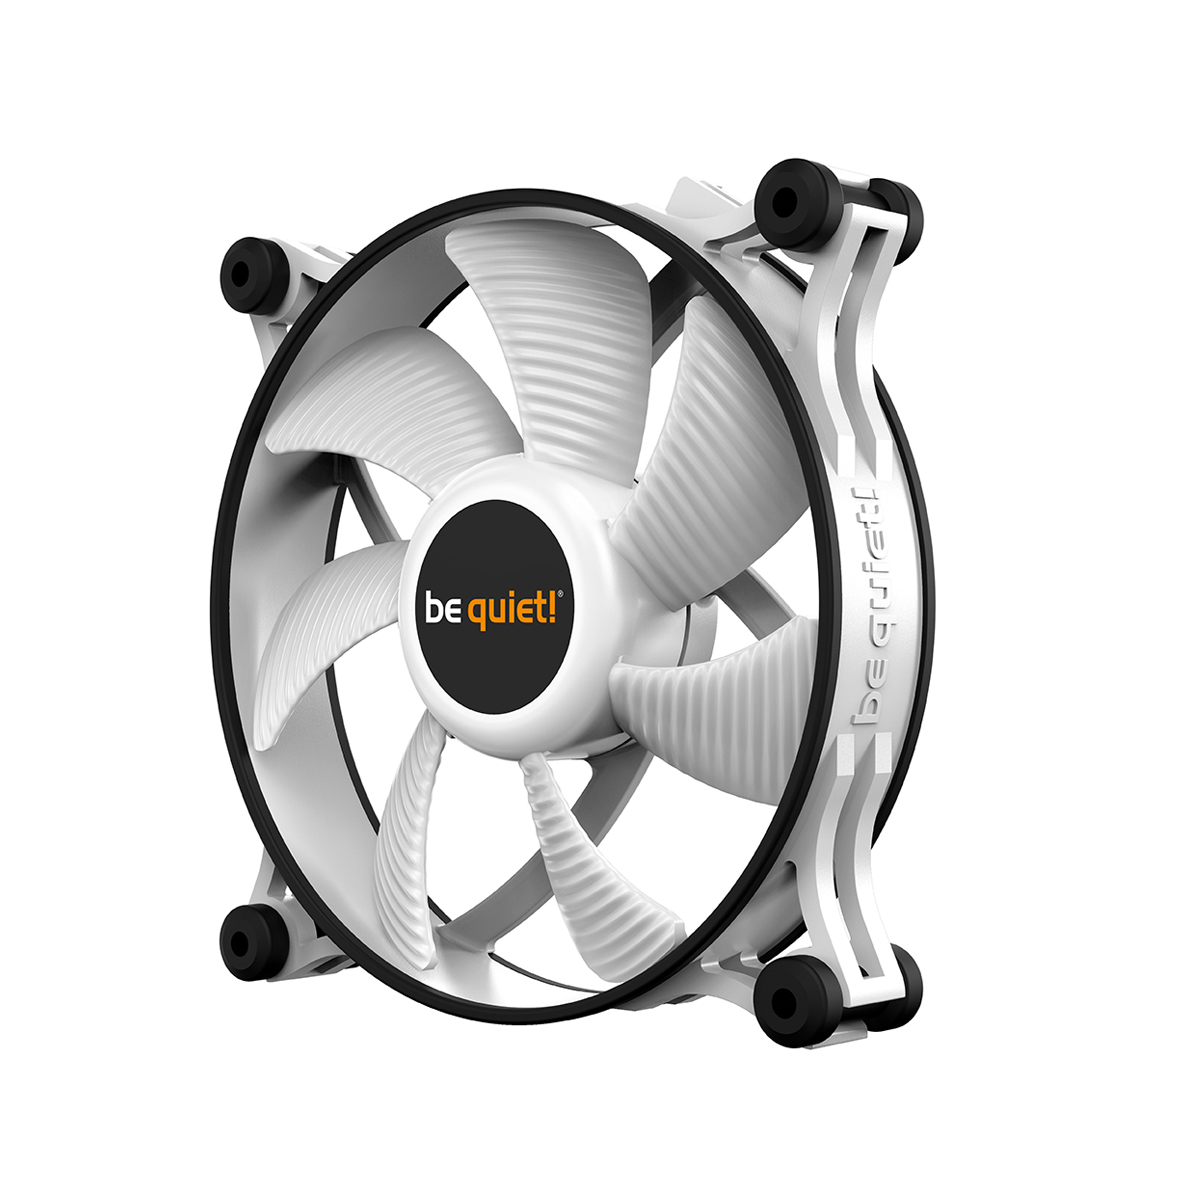 be quiet! - be quiet! Shadow Wings 2 120mm PWM Fan - White